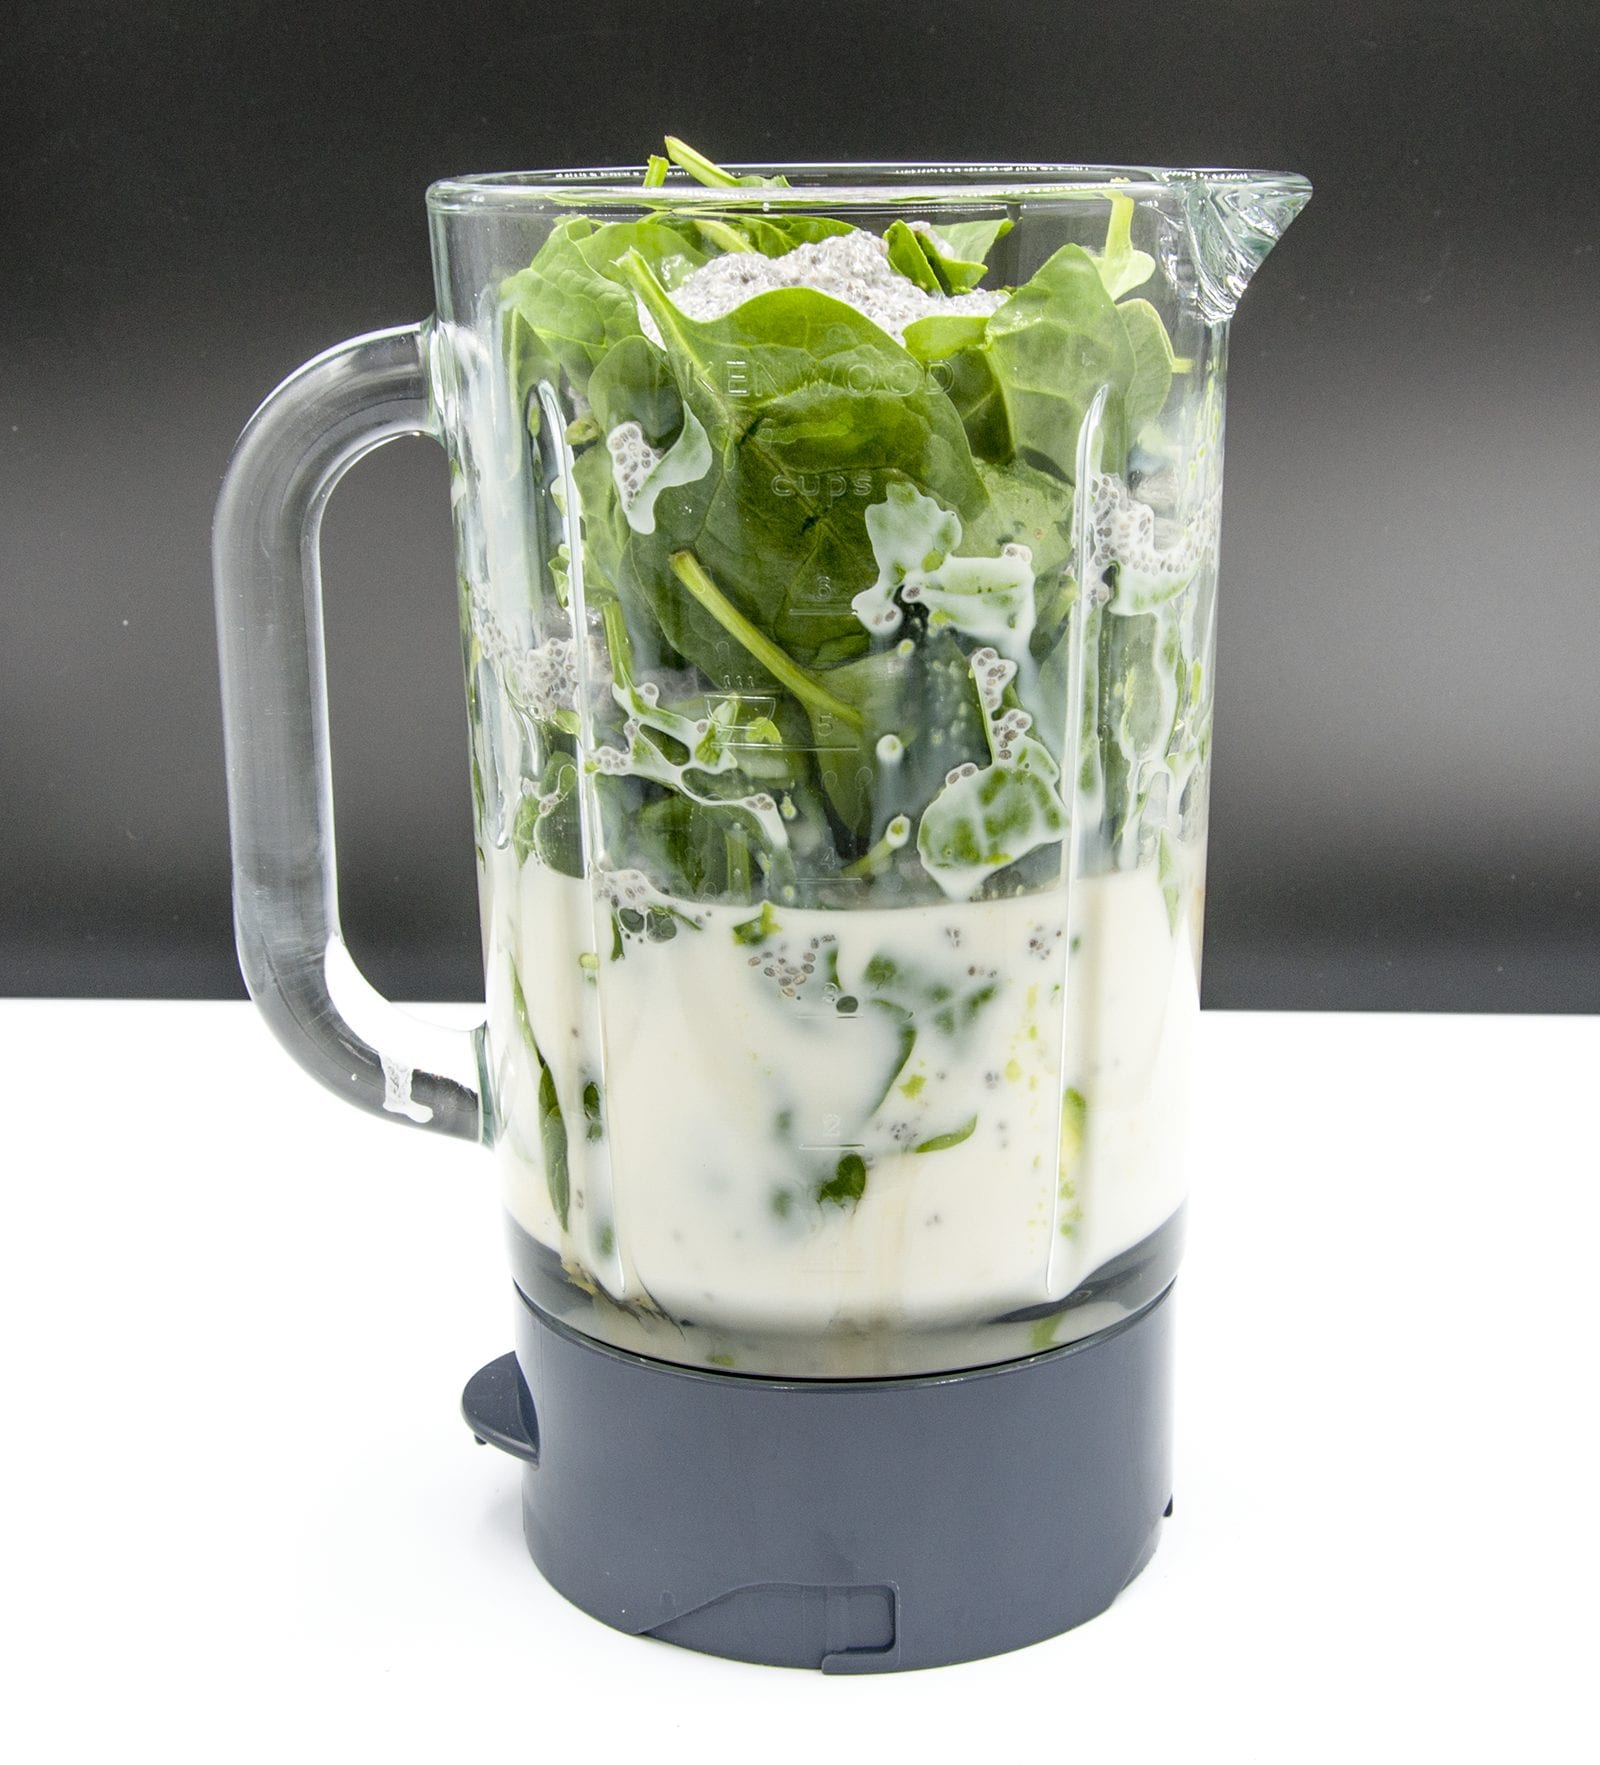 Avocado and spinach detox smoothie. But why detox? Because of the superfoods of ginger and chia seeds! All washed down with almond milk and honey. Yum! | theyumyumclub.com